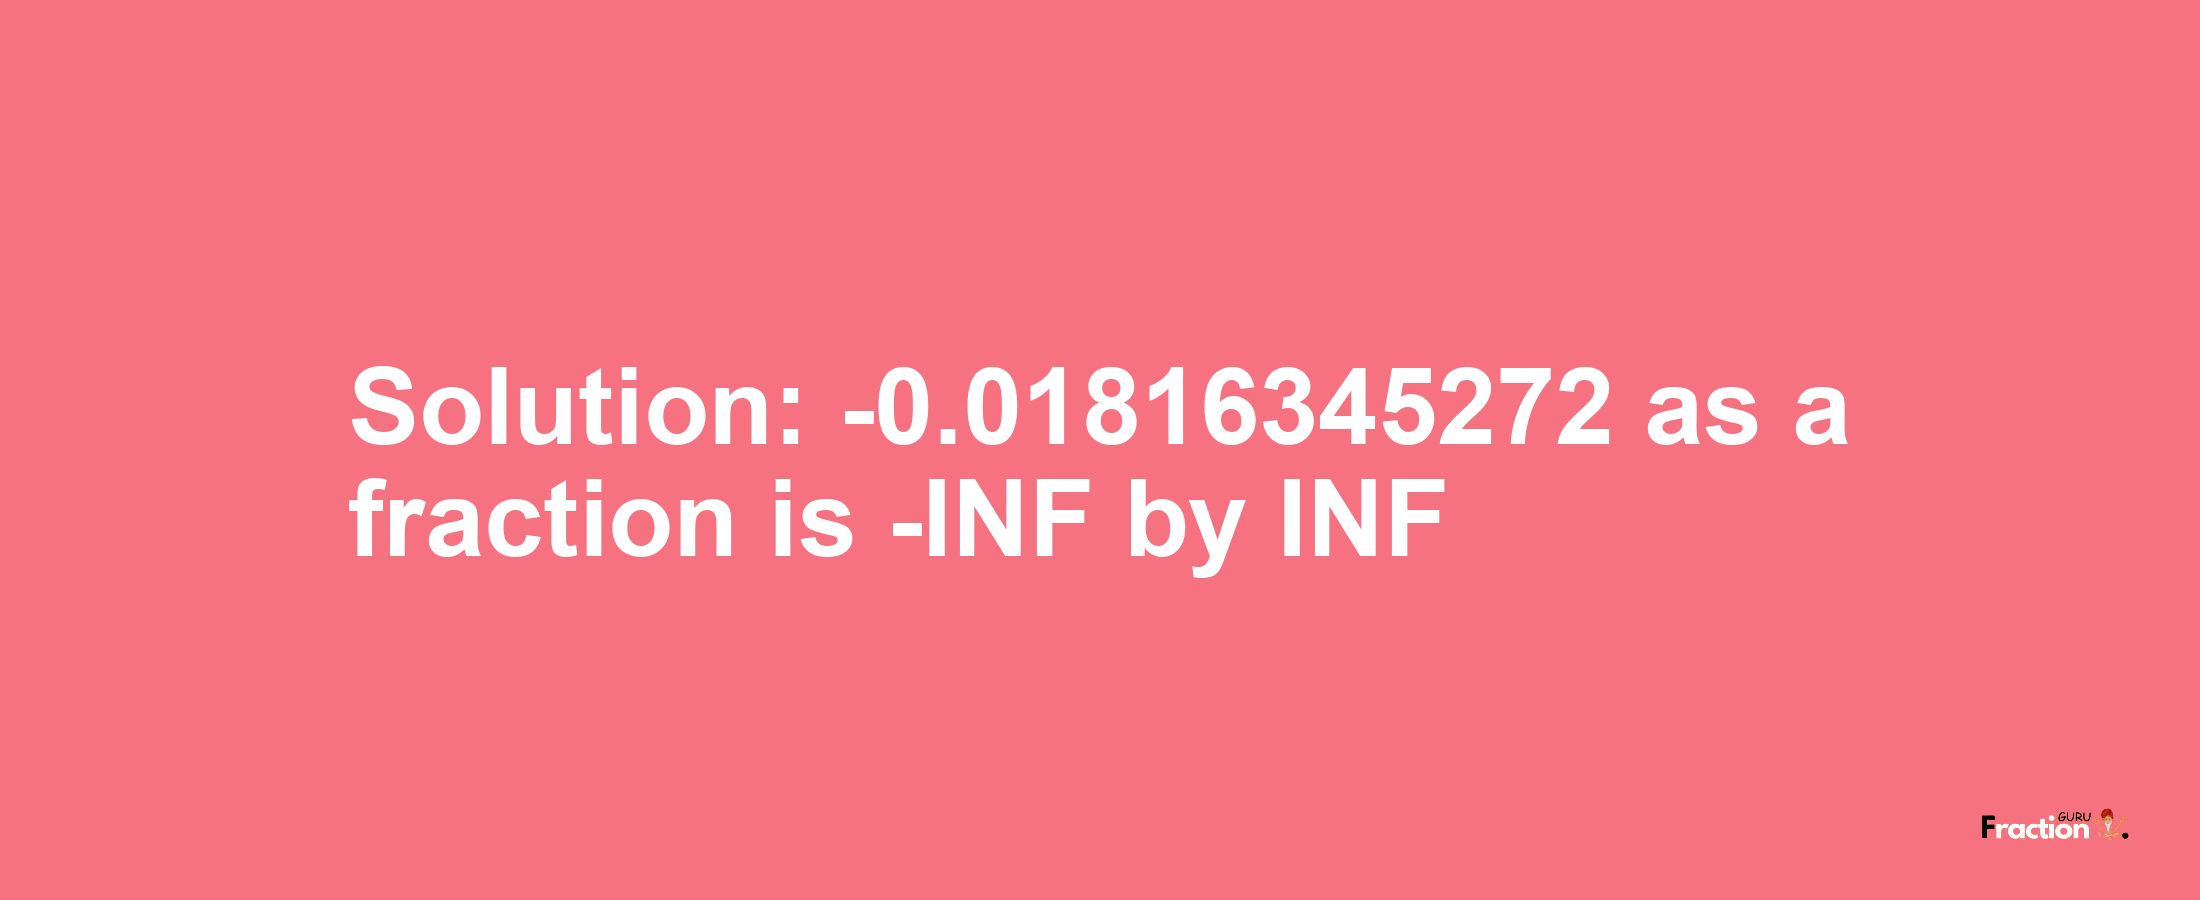 Solution:-0.01816345272 as a fraction is -INF/INF